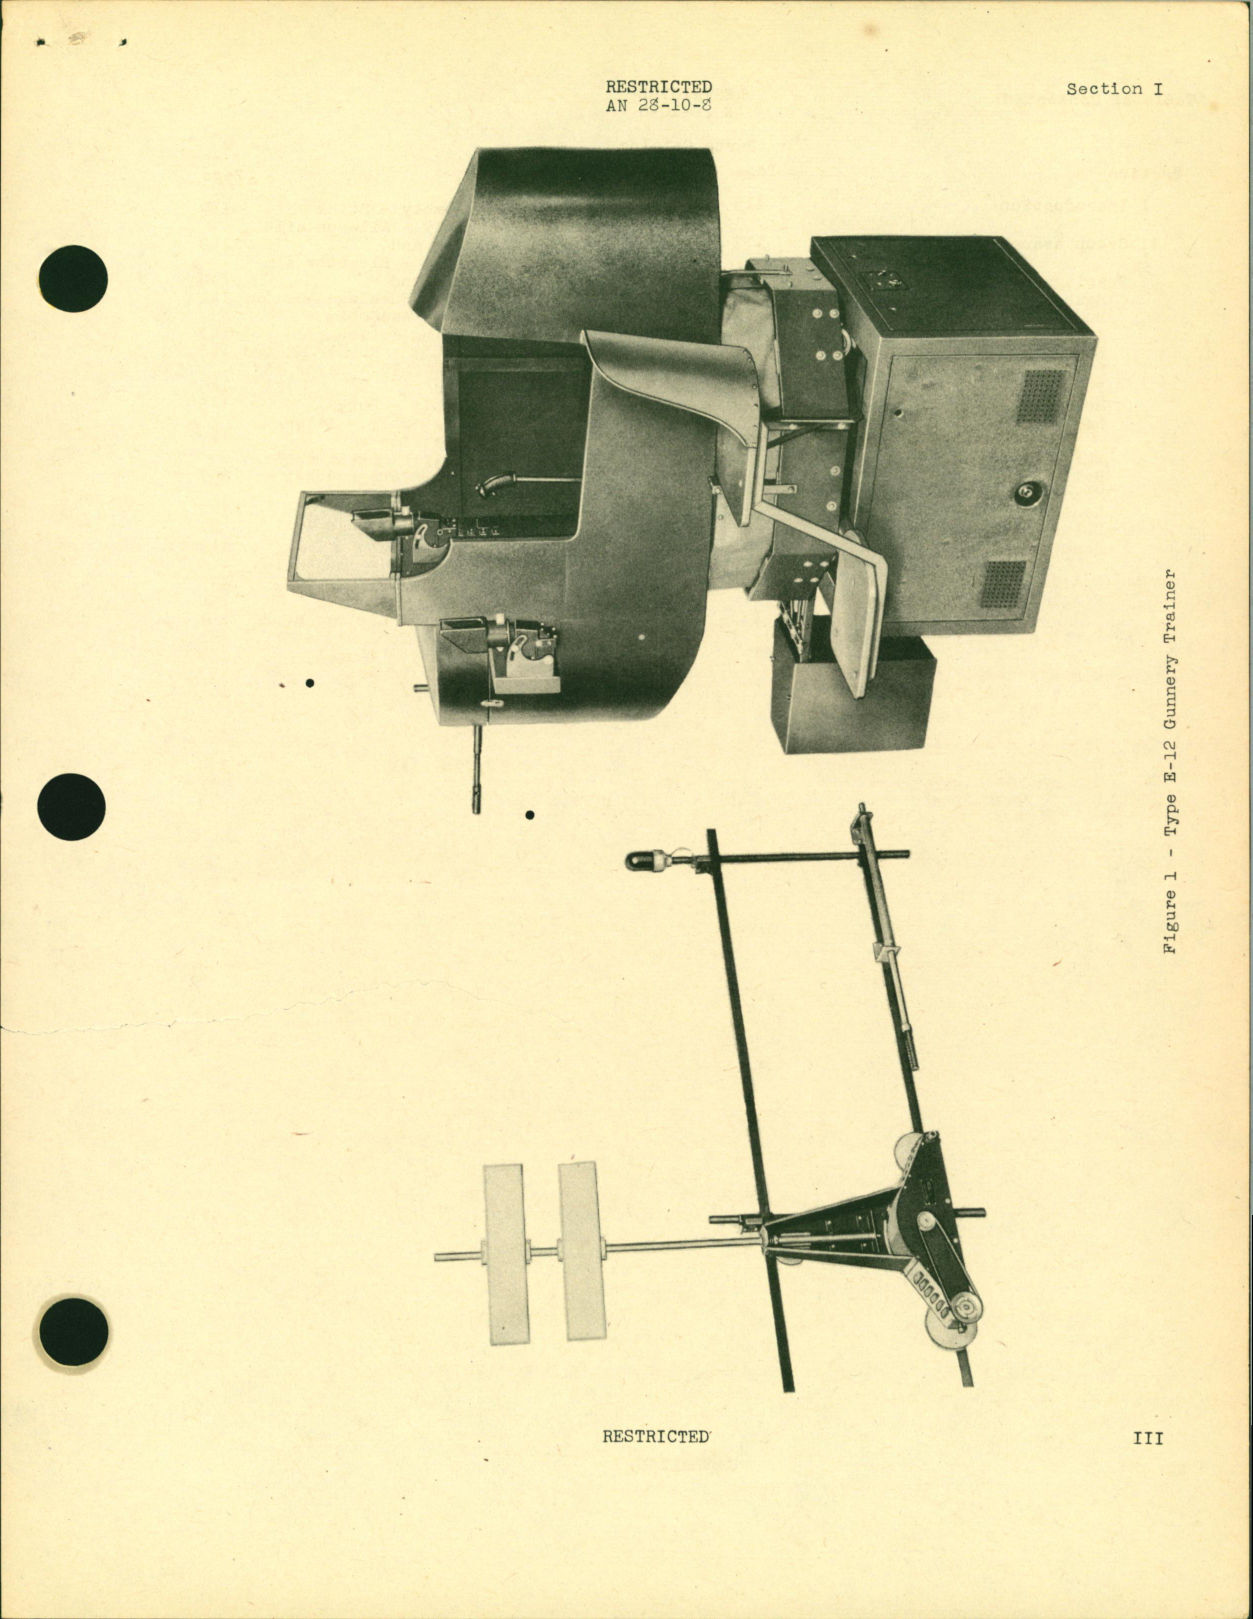 Sample page 5 from AirCorps Library document: Handbook of Instructions with Parts Catalog for Fixed Gunnery Trainer Type E-12 (Ground)